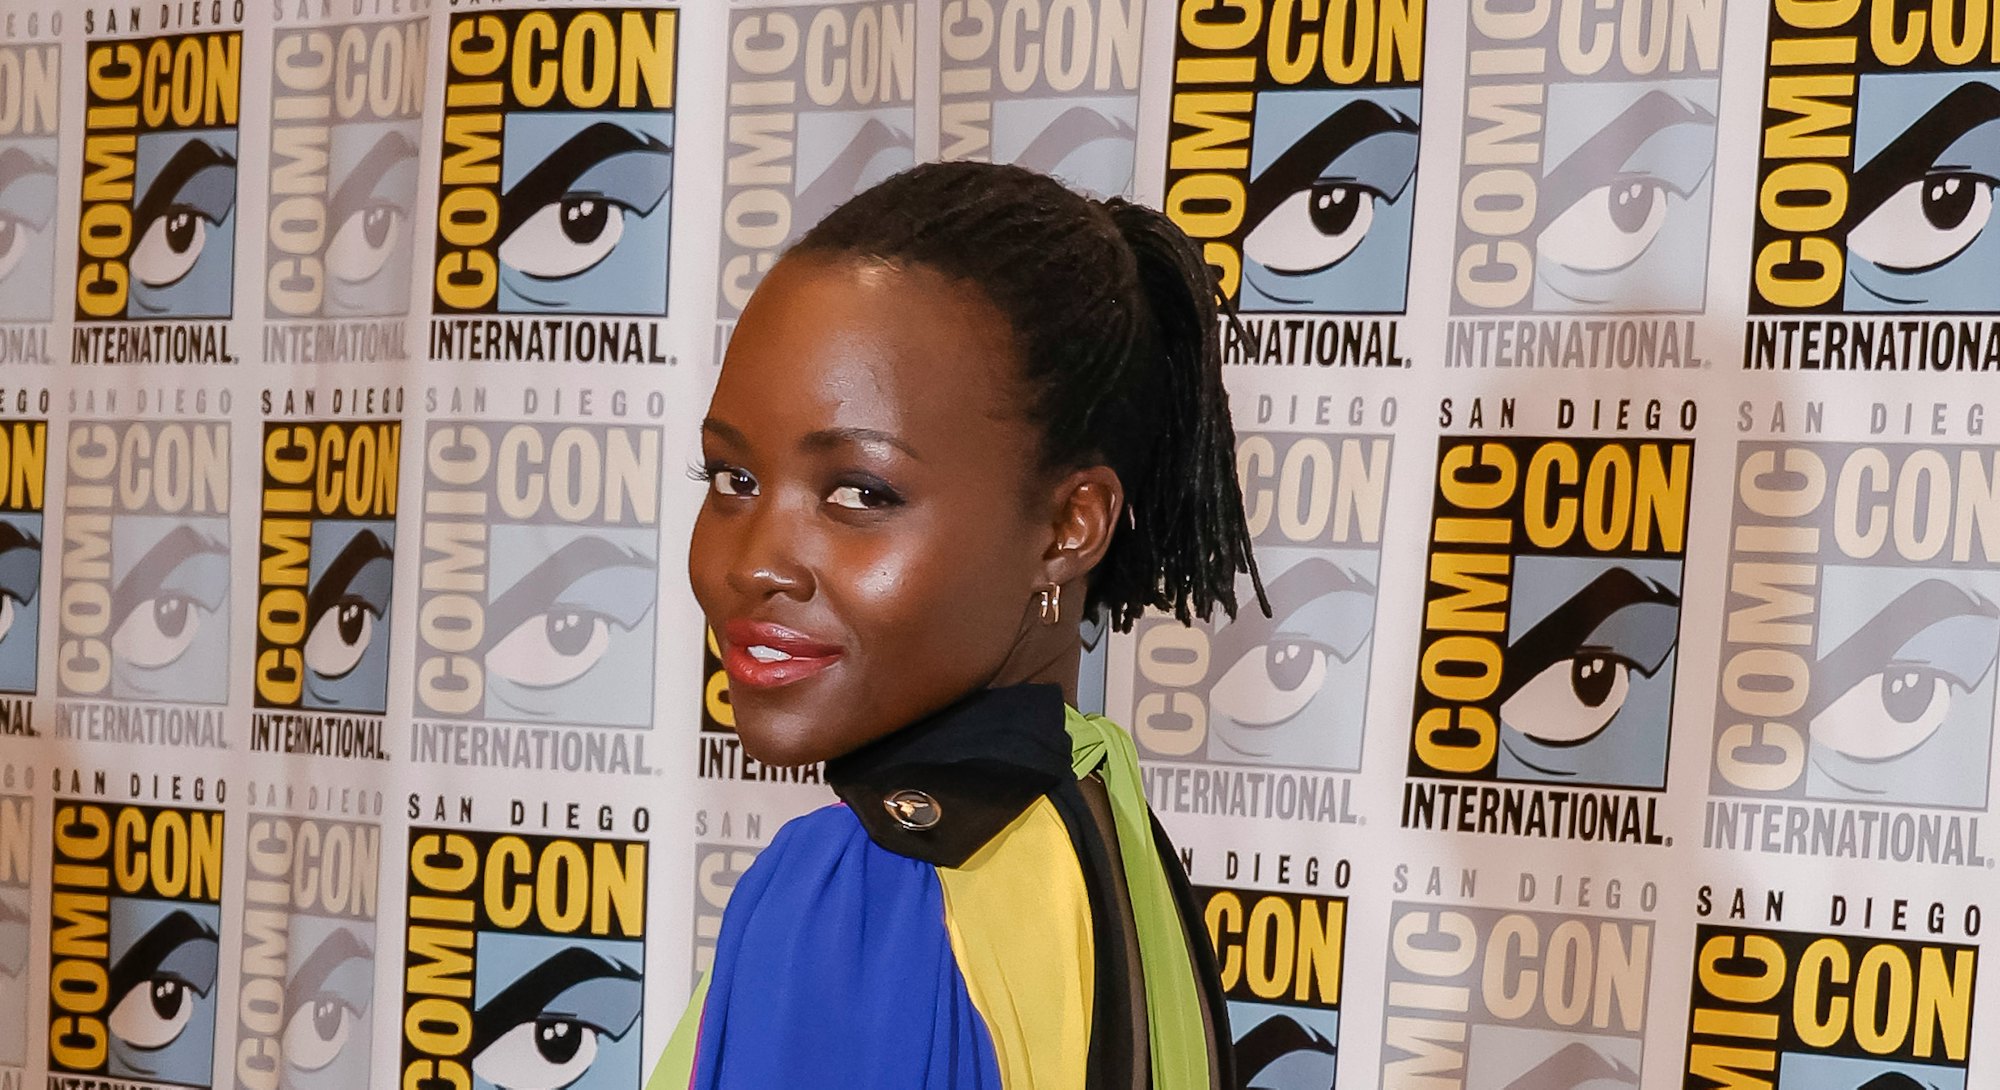 SAN DIEGO, CALIFORNIA - JULY 23: Lupita Nyong'o attends the Marvel Cinematic Universe press line dur...